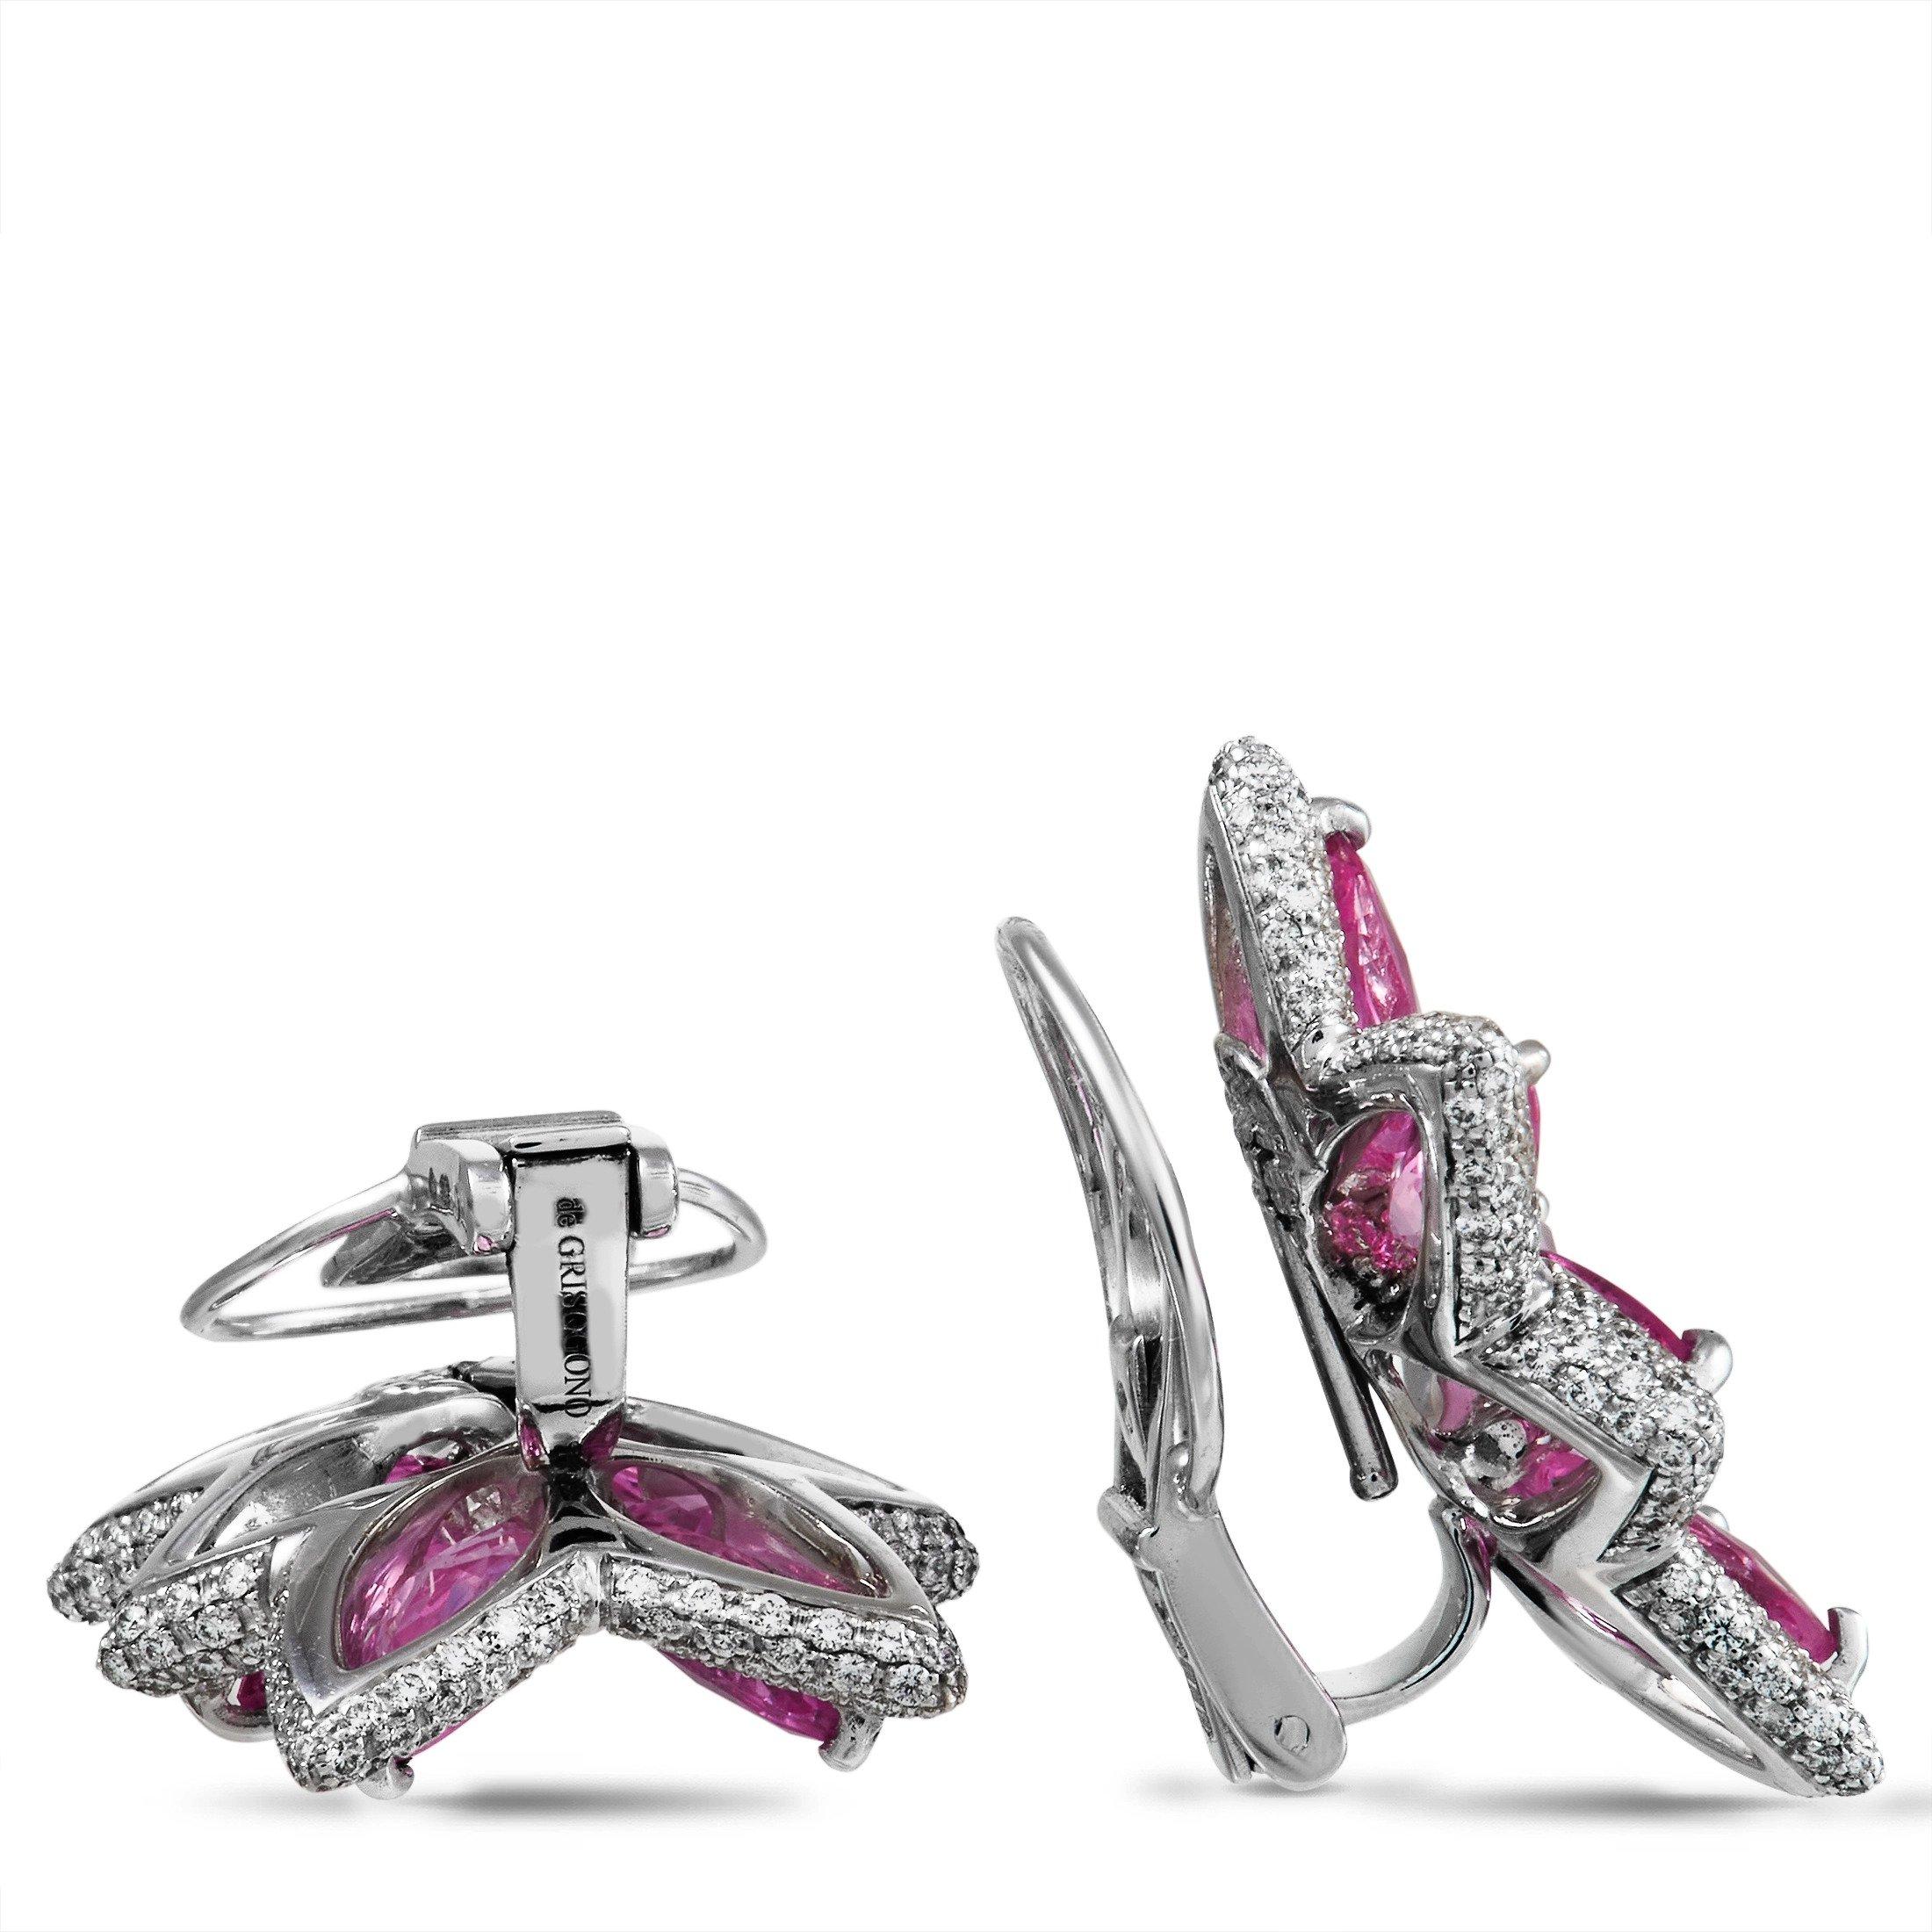 Bold, vibrant, and dynamic in design, these De Grisogono earrings will forever make a statement. A breathtaking arrangement of pink sapphires totaling 15.20 carats add undeniable visual impact, especially when bordered by glittering diamonds